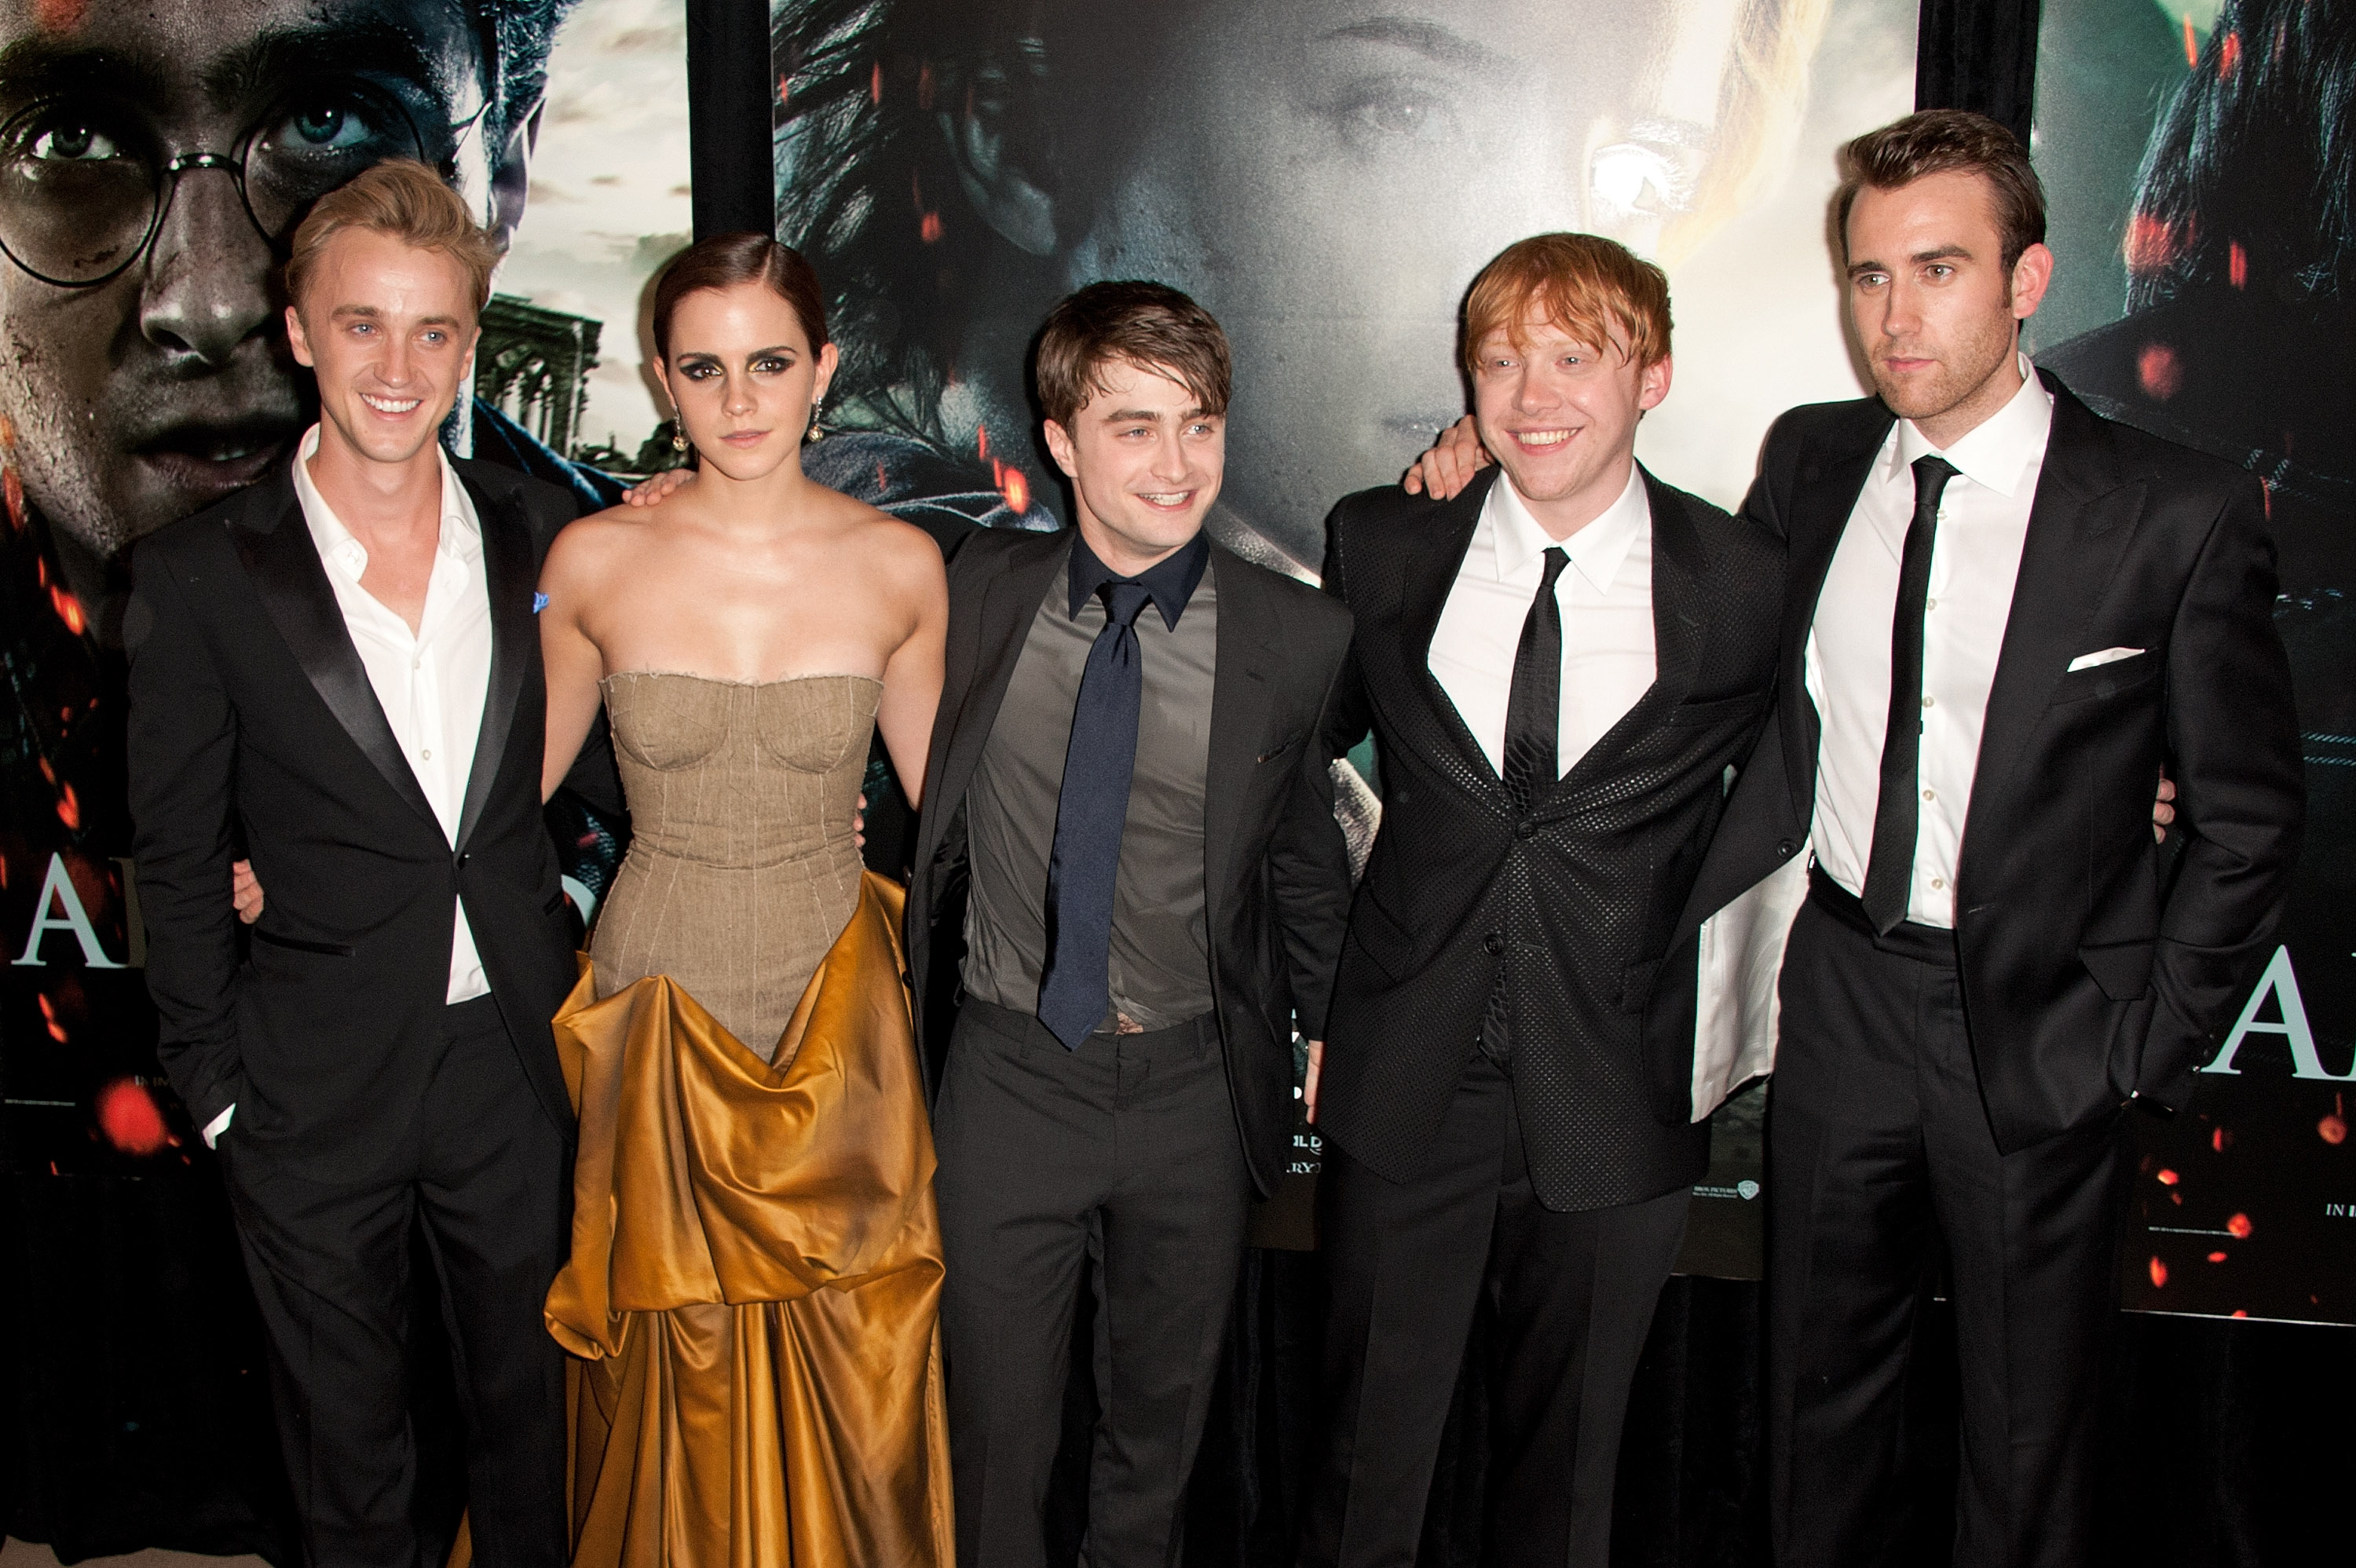 Tom Felton, Emma Watson, Daniel Radcliffe, Rupert Grint, and Matthew Lewis at the premiere of "Harry Potter and the Deathly Hallows: Part 2" on July 11, 2011, in New York City. | Source: Getty Images